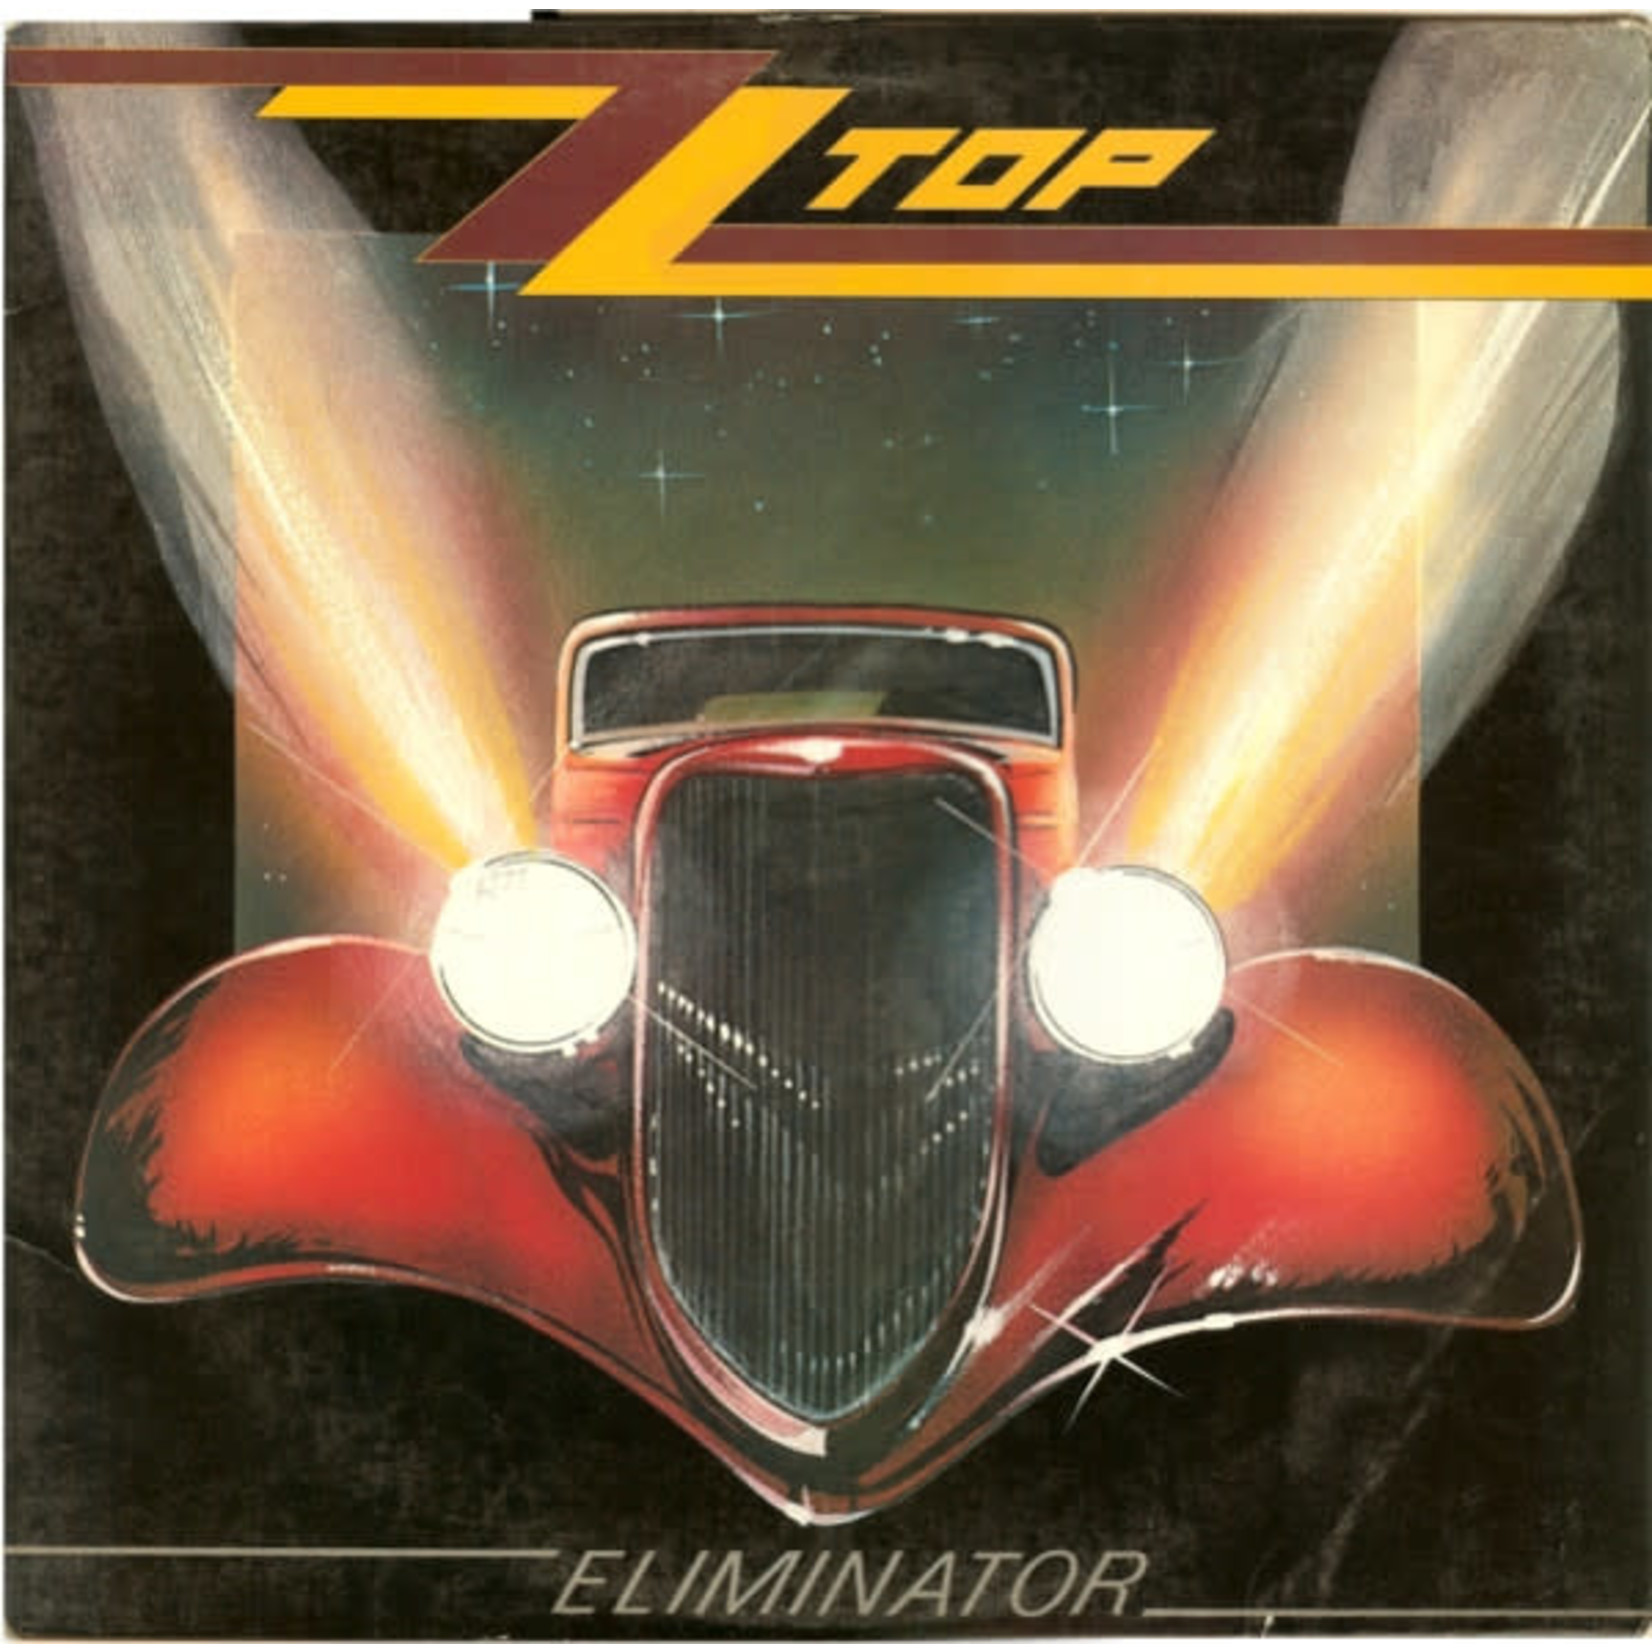 [New] ZZ Top - Eliminator (40th Anniversary, gold nugget vinyl, indie exclusive)